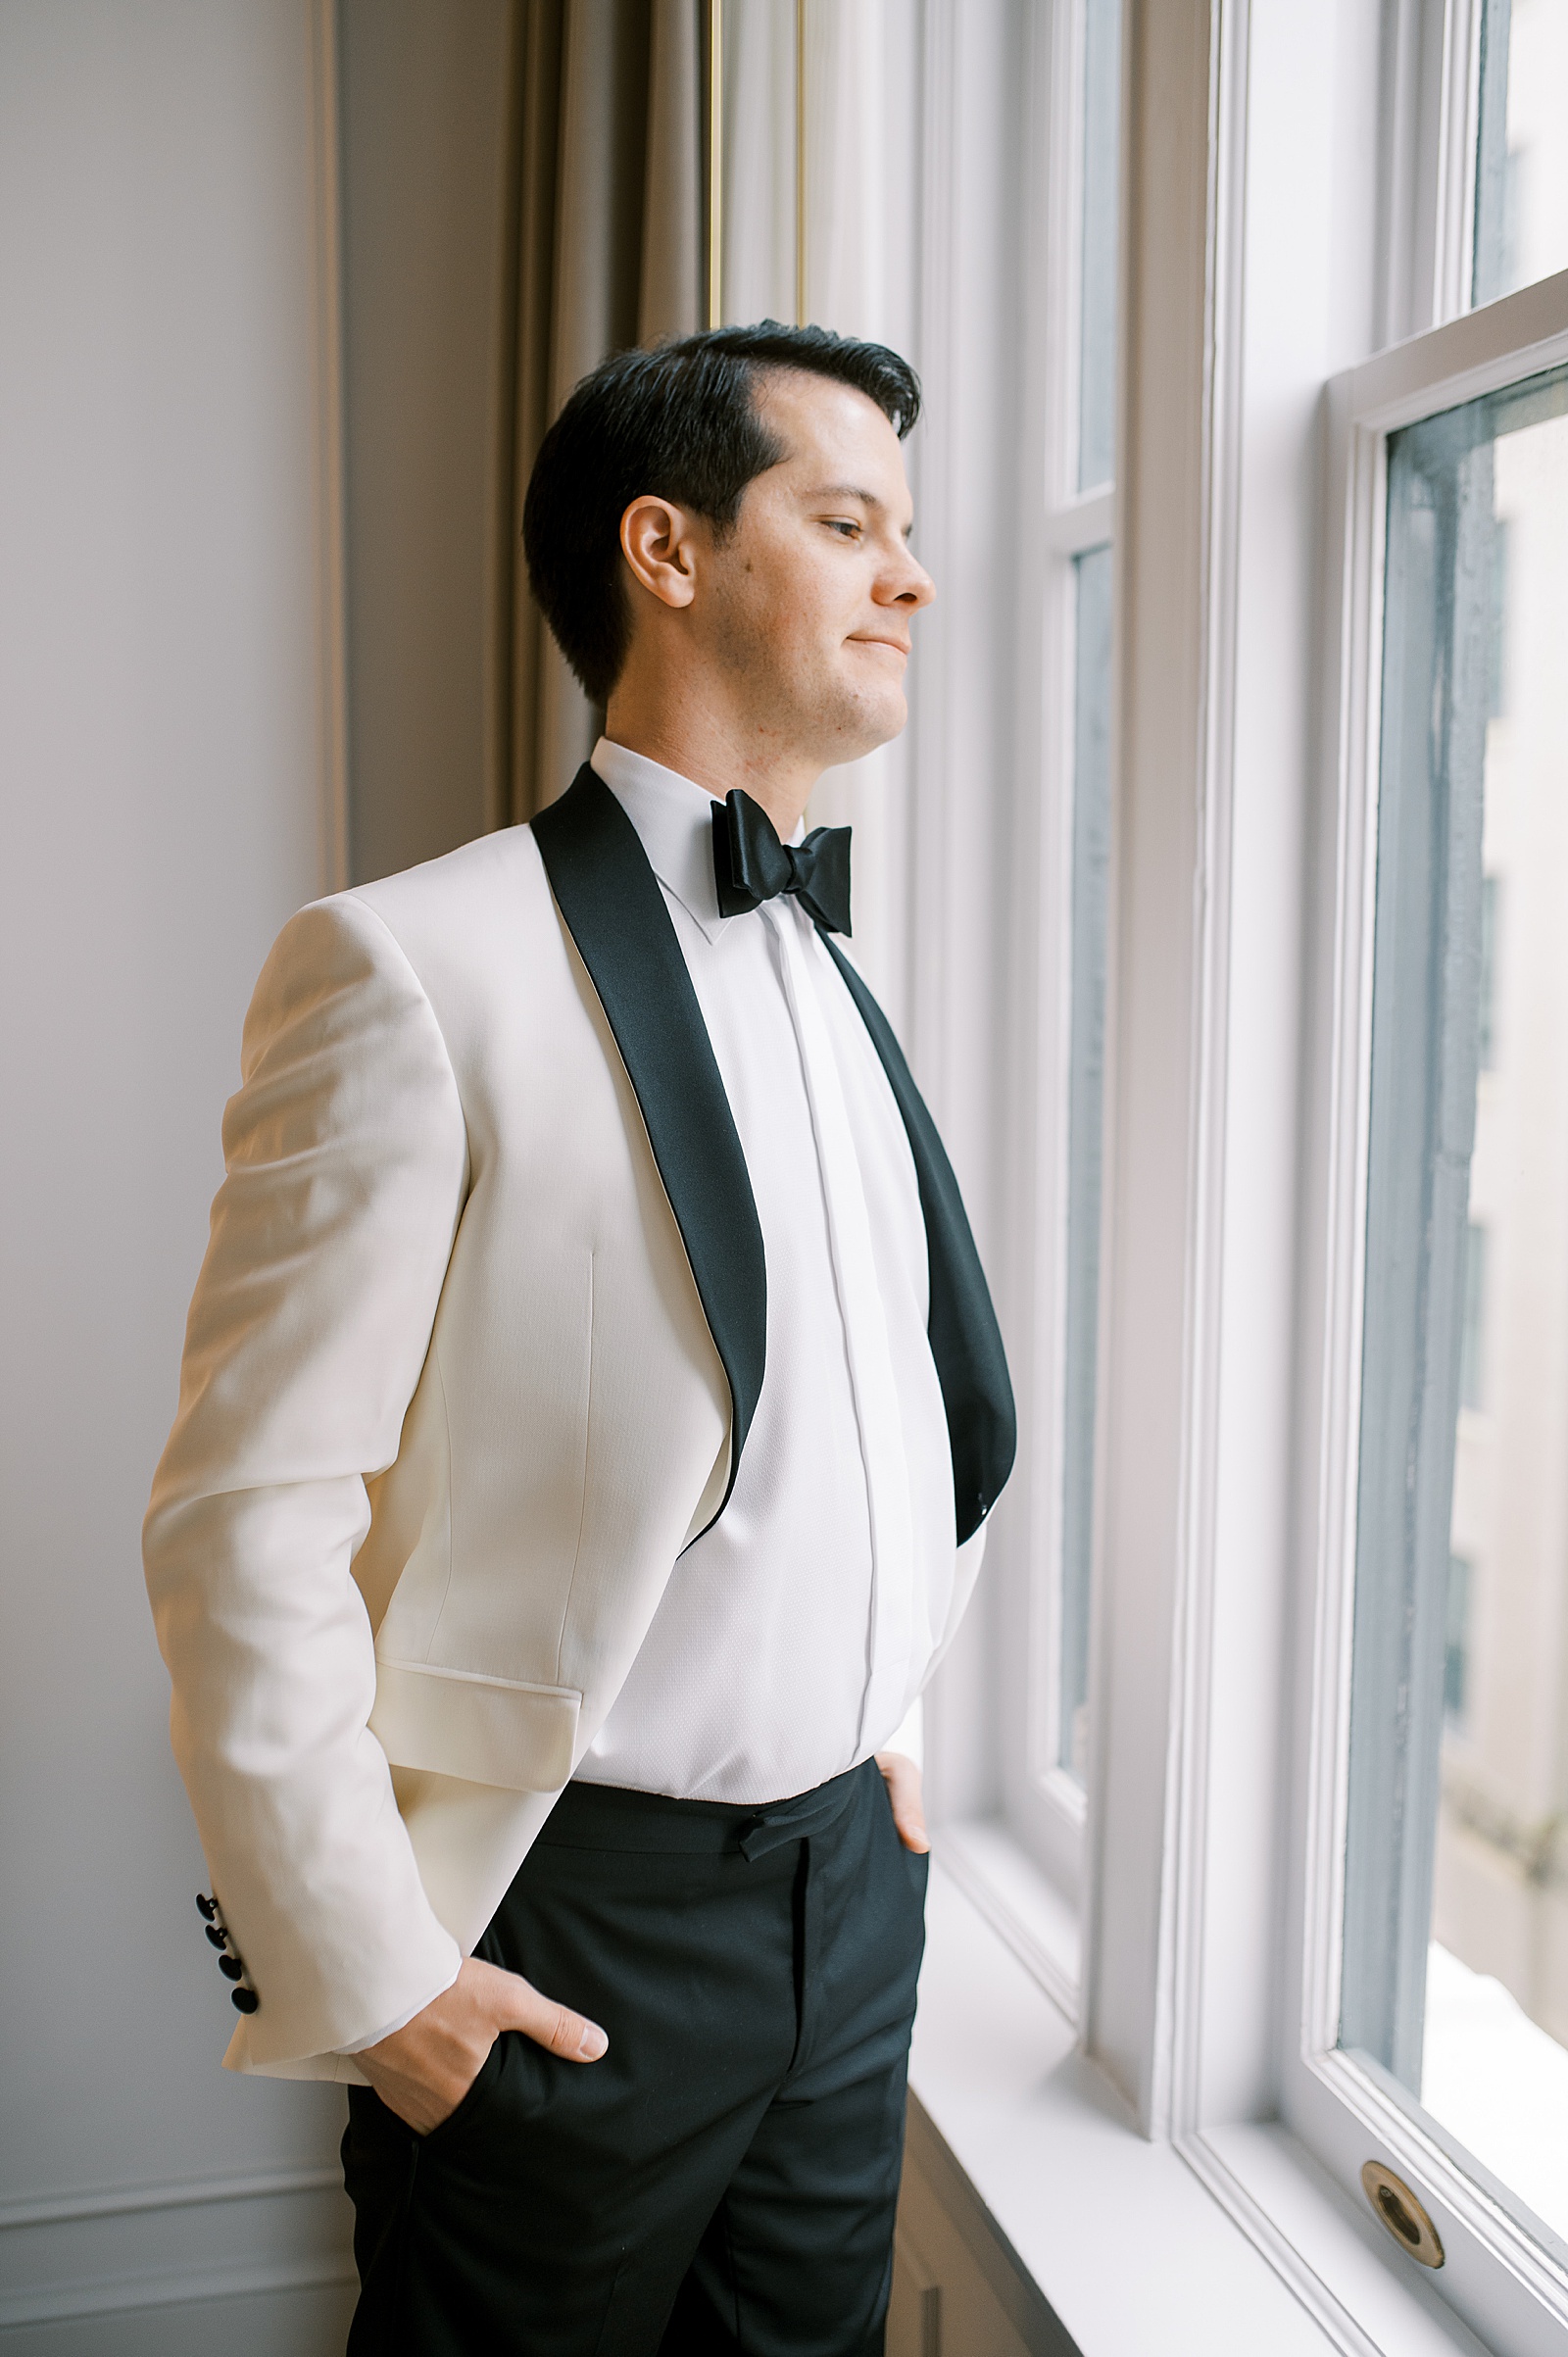 A groom in a white tuxedo poses for a film wedding portrait beside a hotel window.